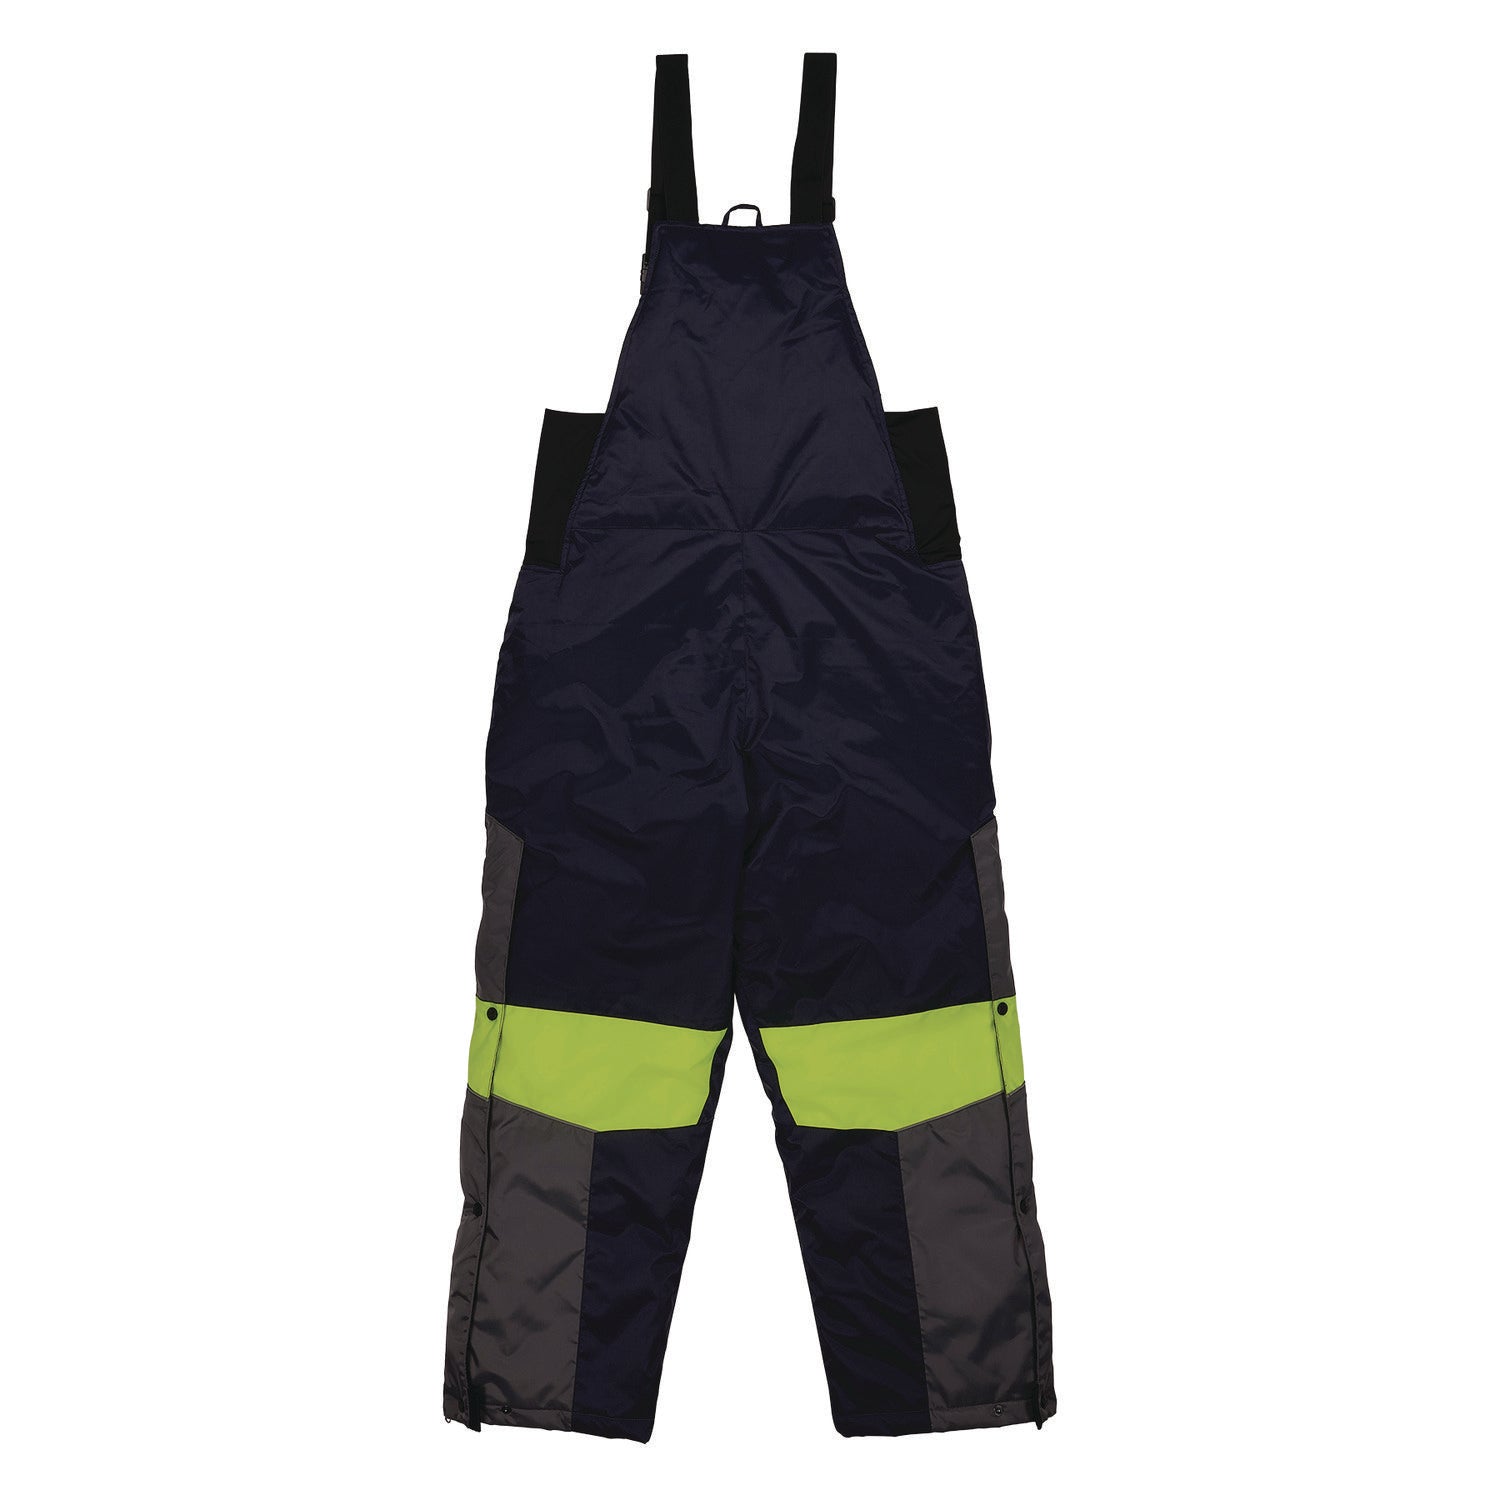 n-ferno-6477-insulated-cooler-bib-overall-3x-large-navy-ships-in-1-3-business-days_ego41267 - 2